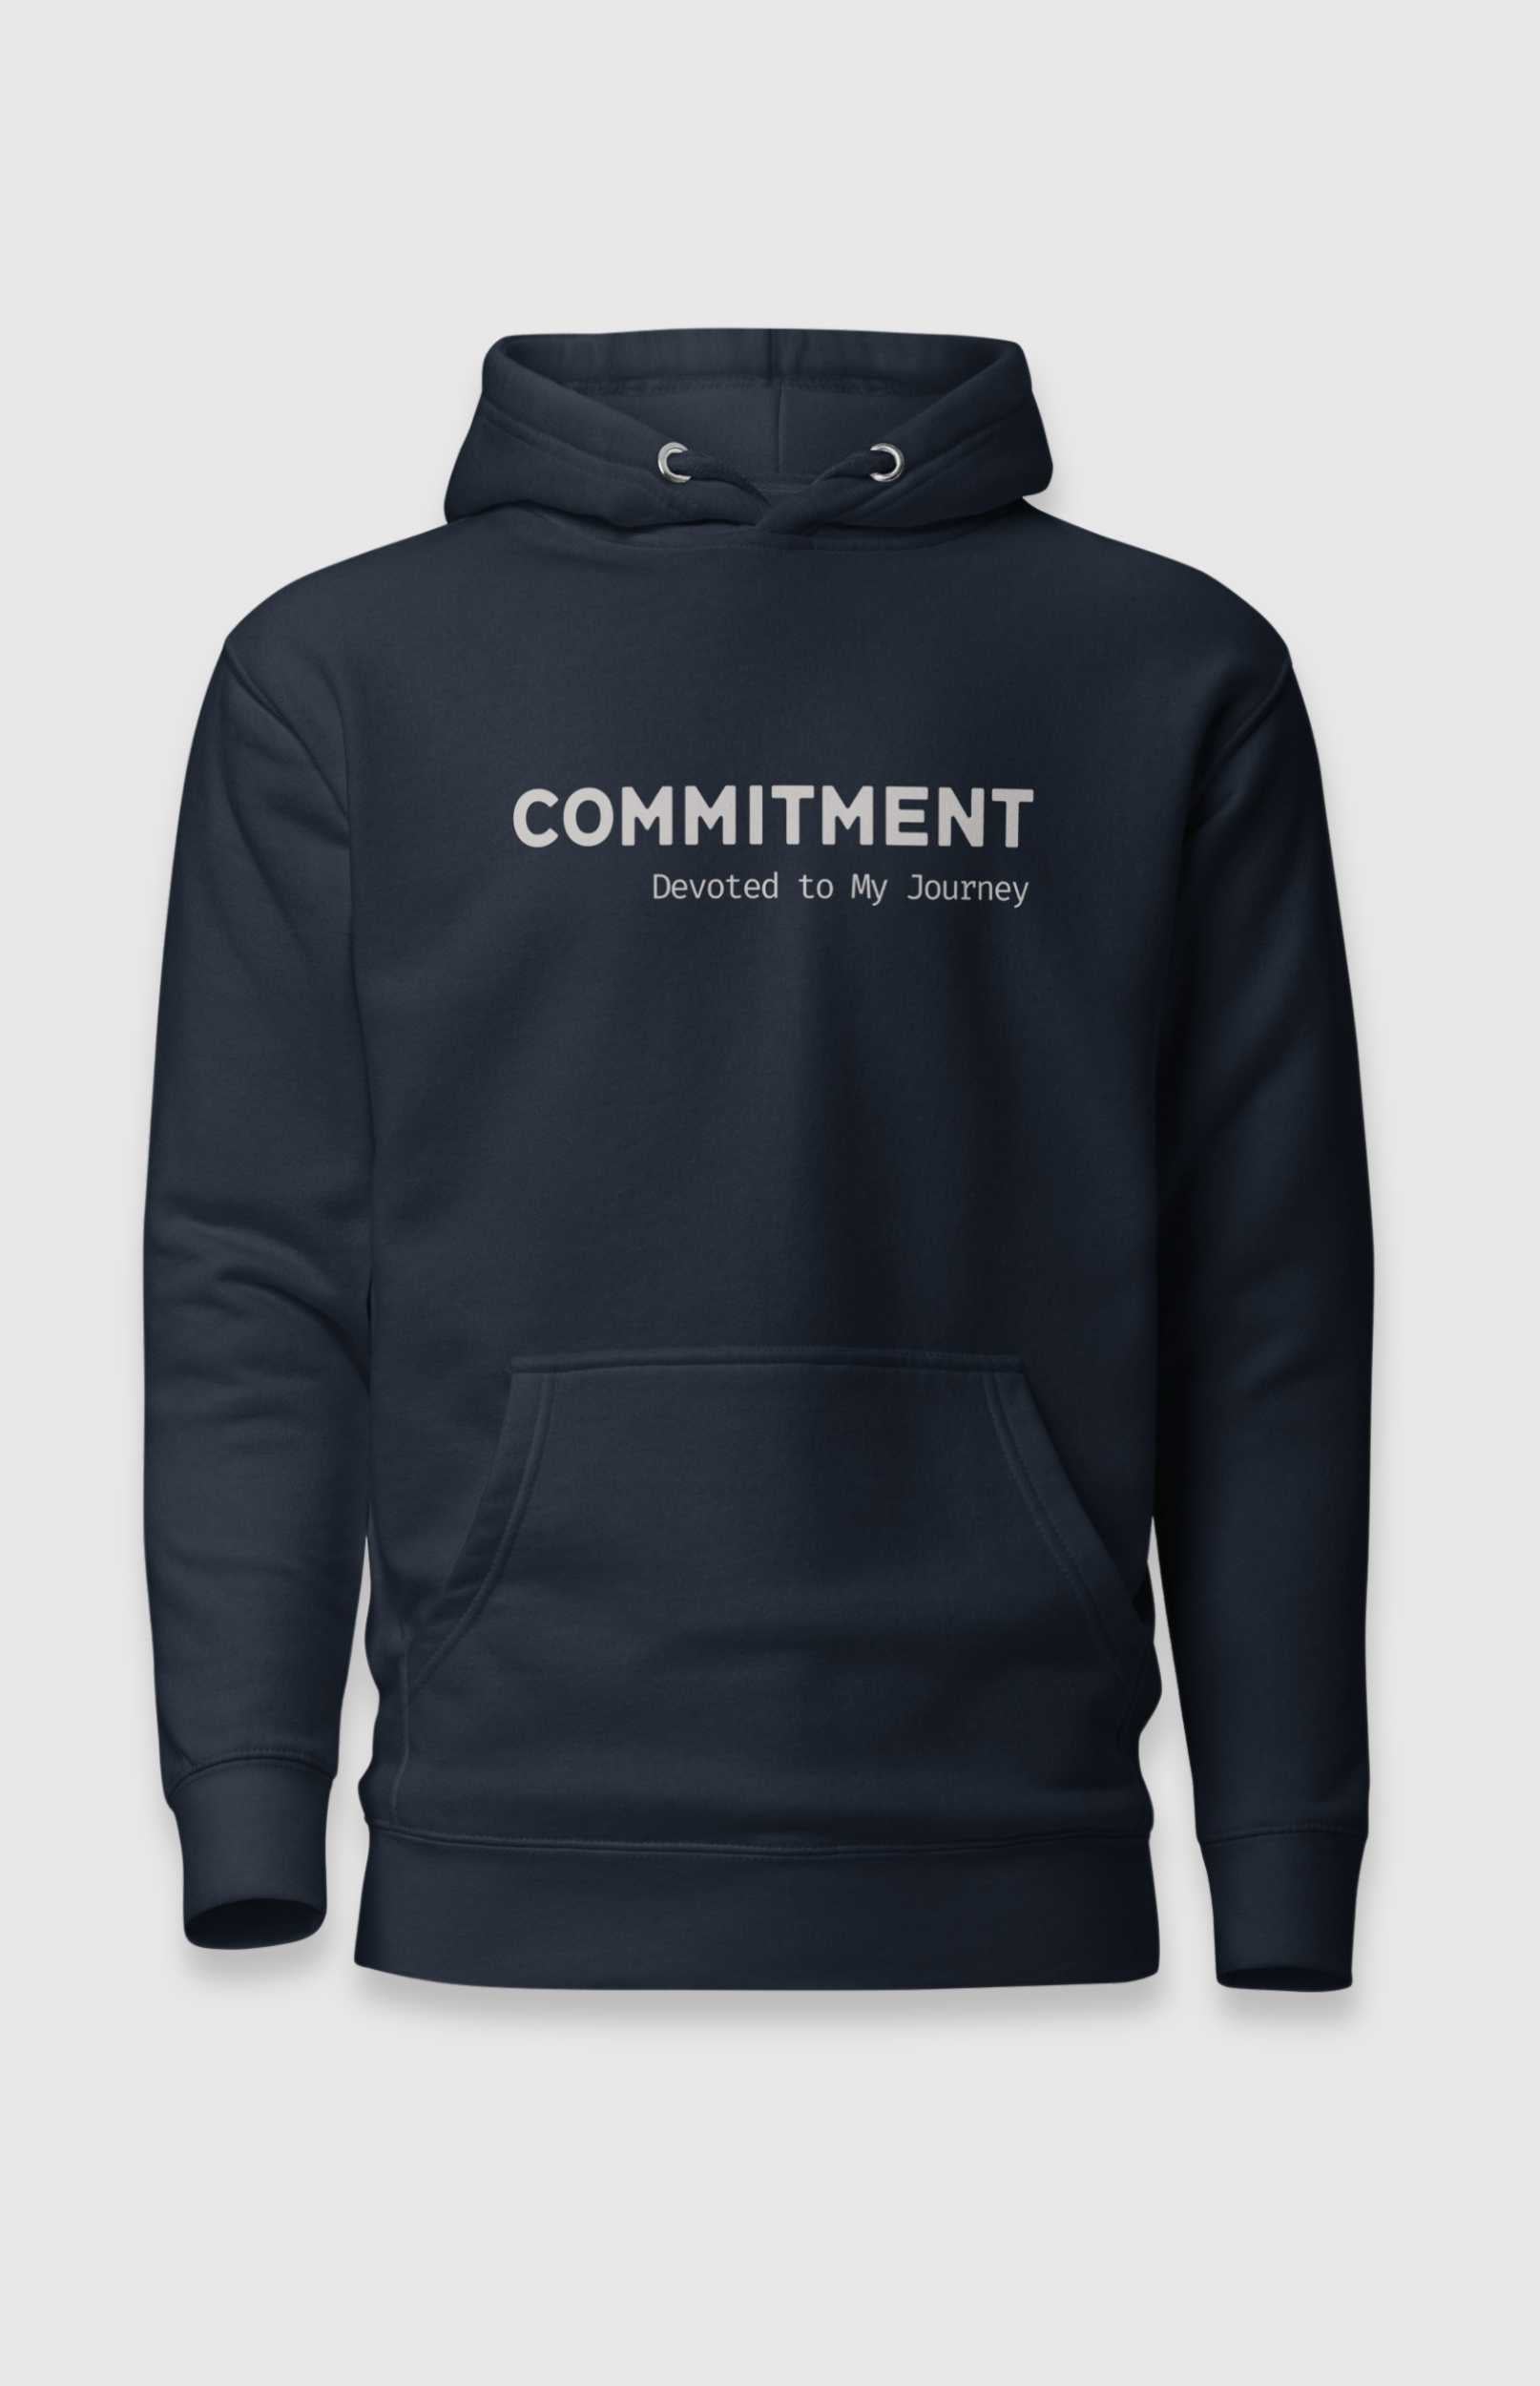 Love Hoodie – Values Driven